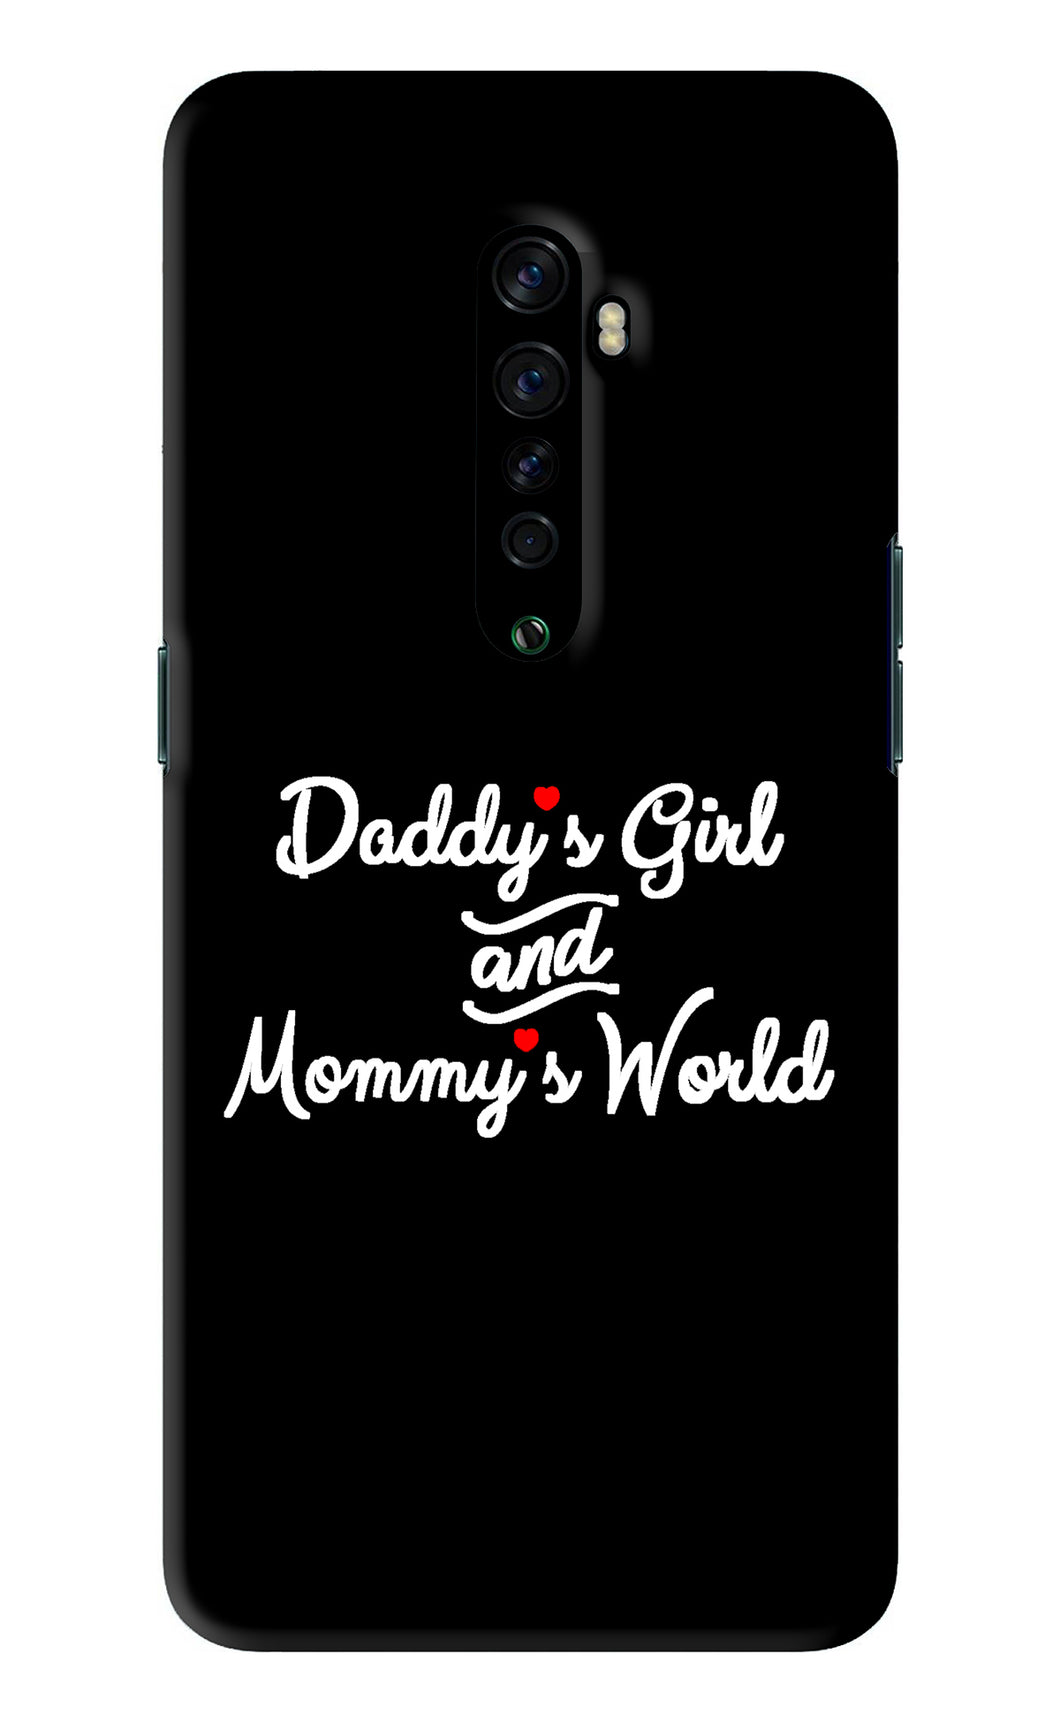 Daddy's Girl and Mommy's World Oppo Reno 2 Back Skin Wrap